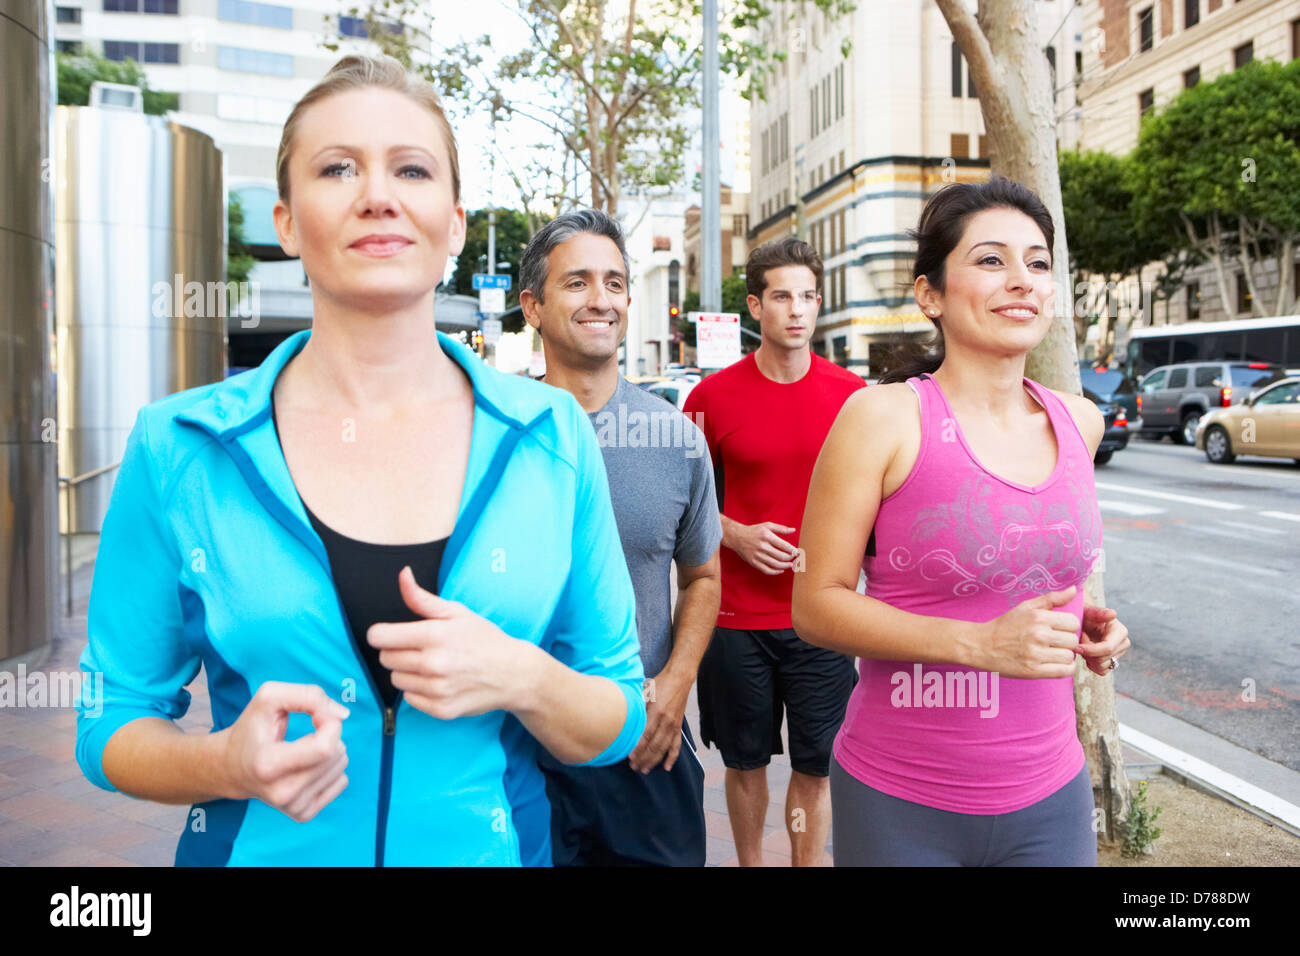 Group Of Runners On Urban Street Stock Photo